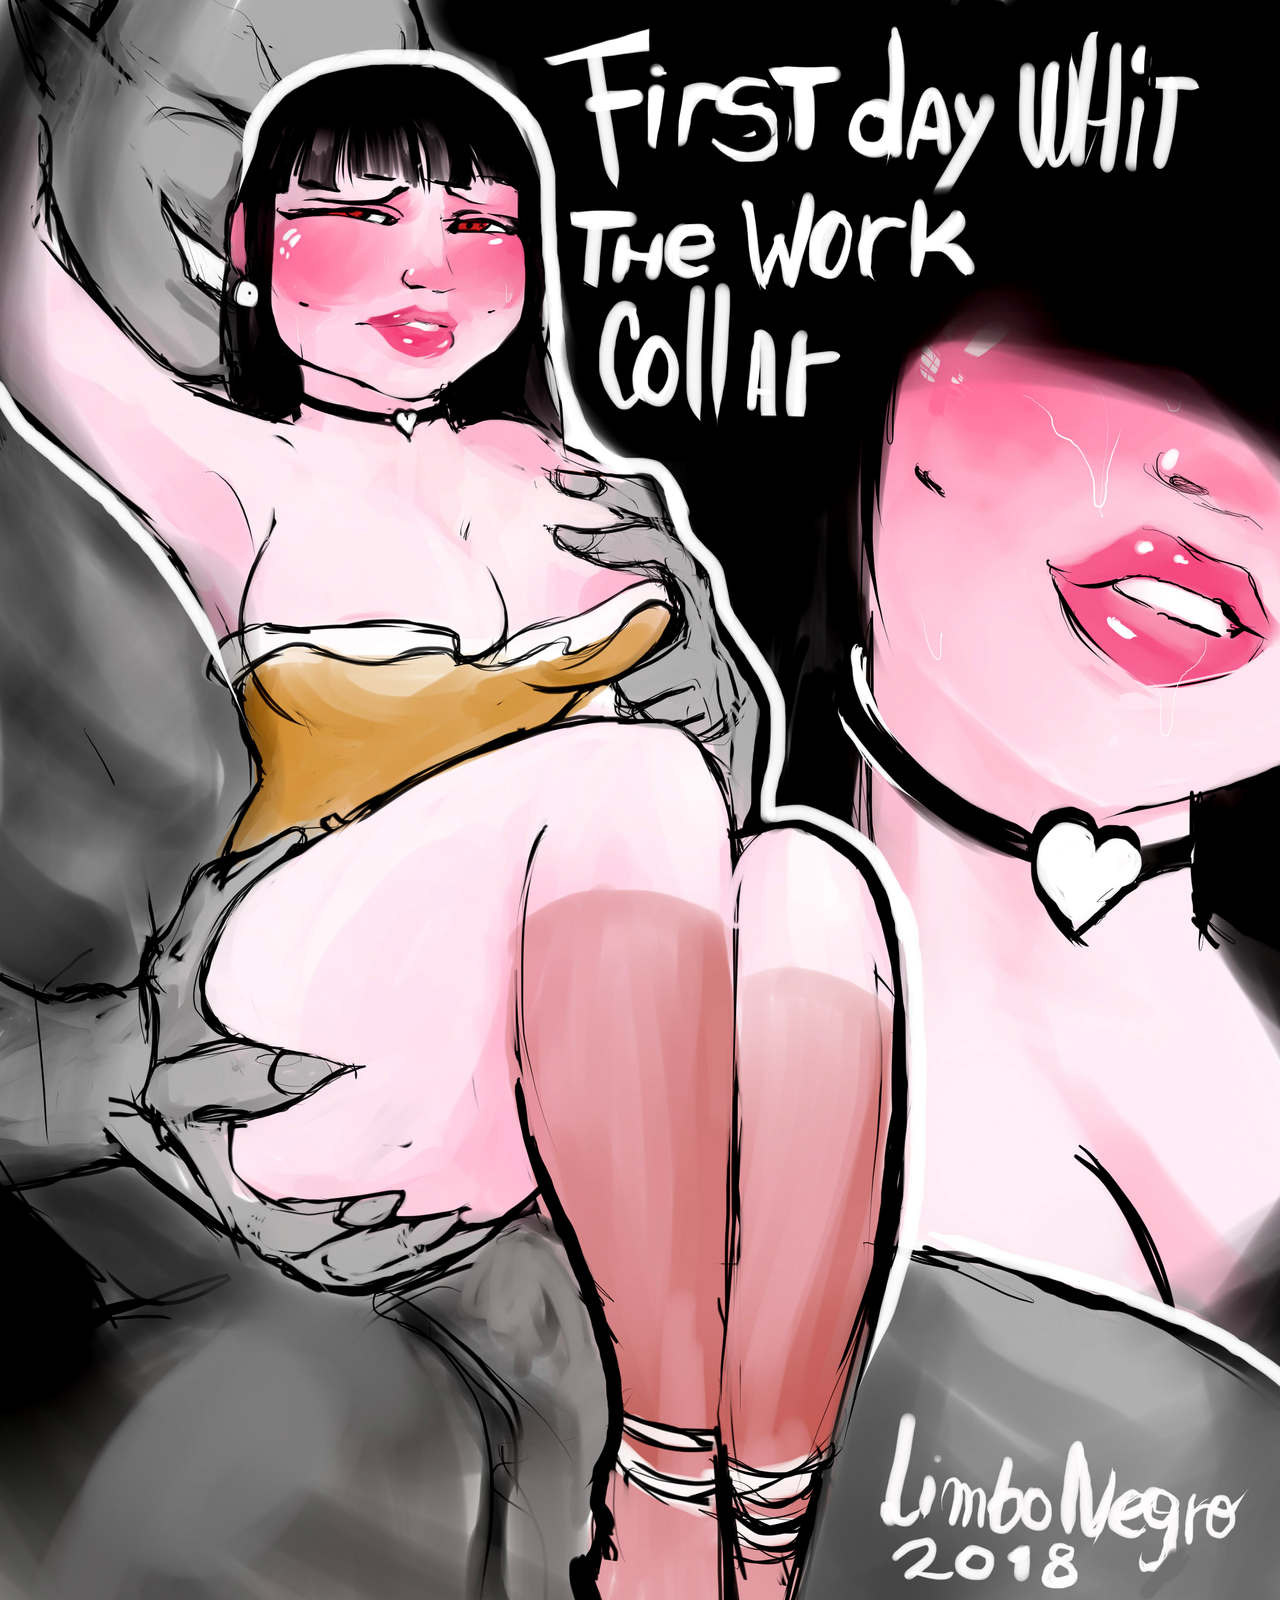 First day whit the collar work by LimboNegro Porn Comic